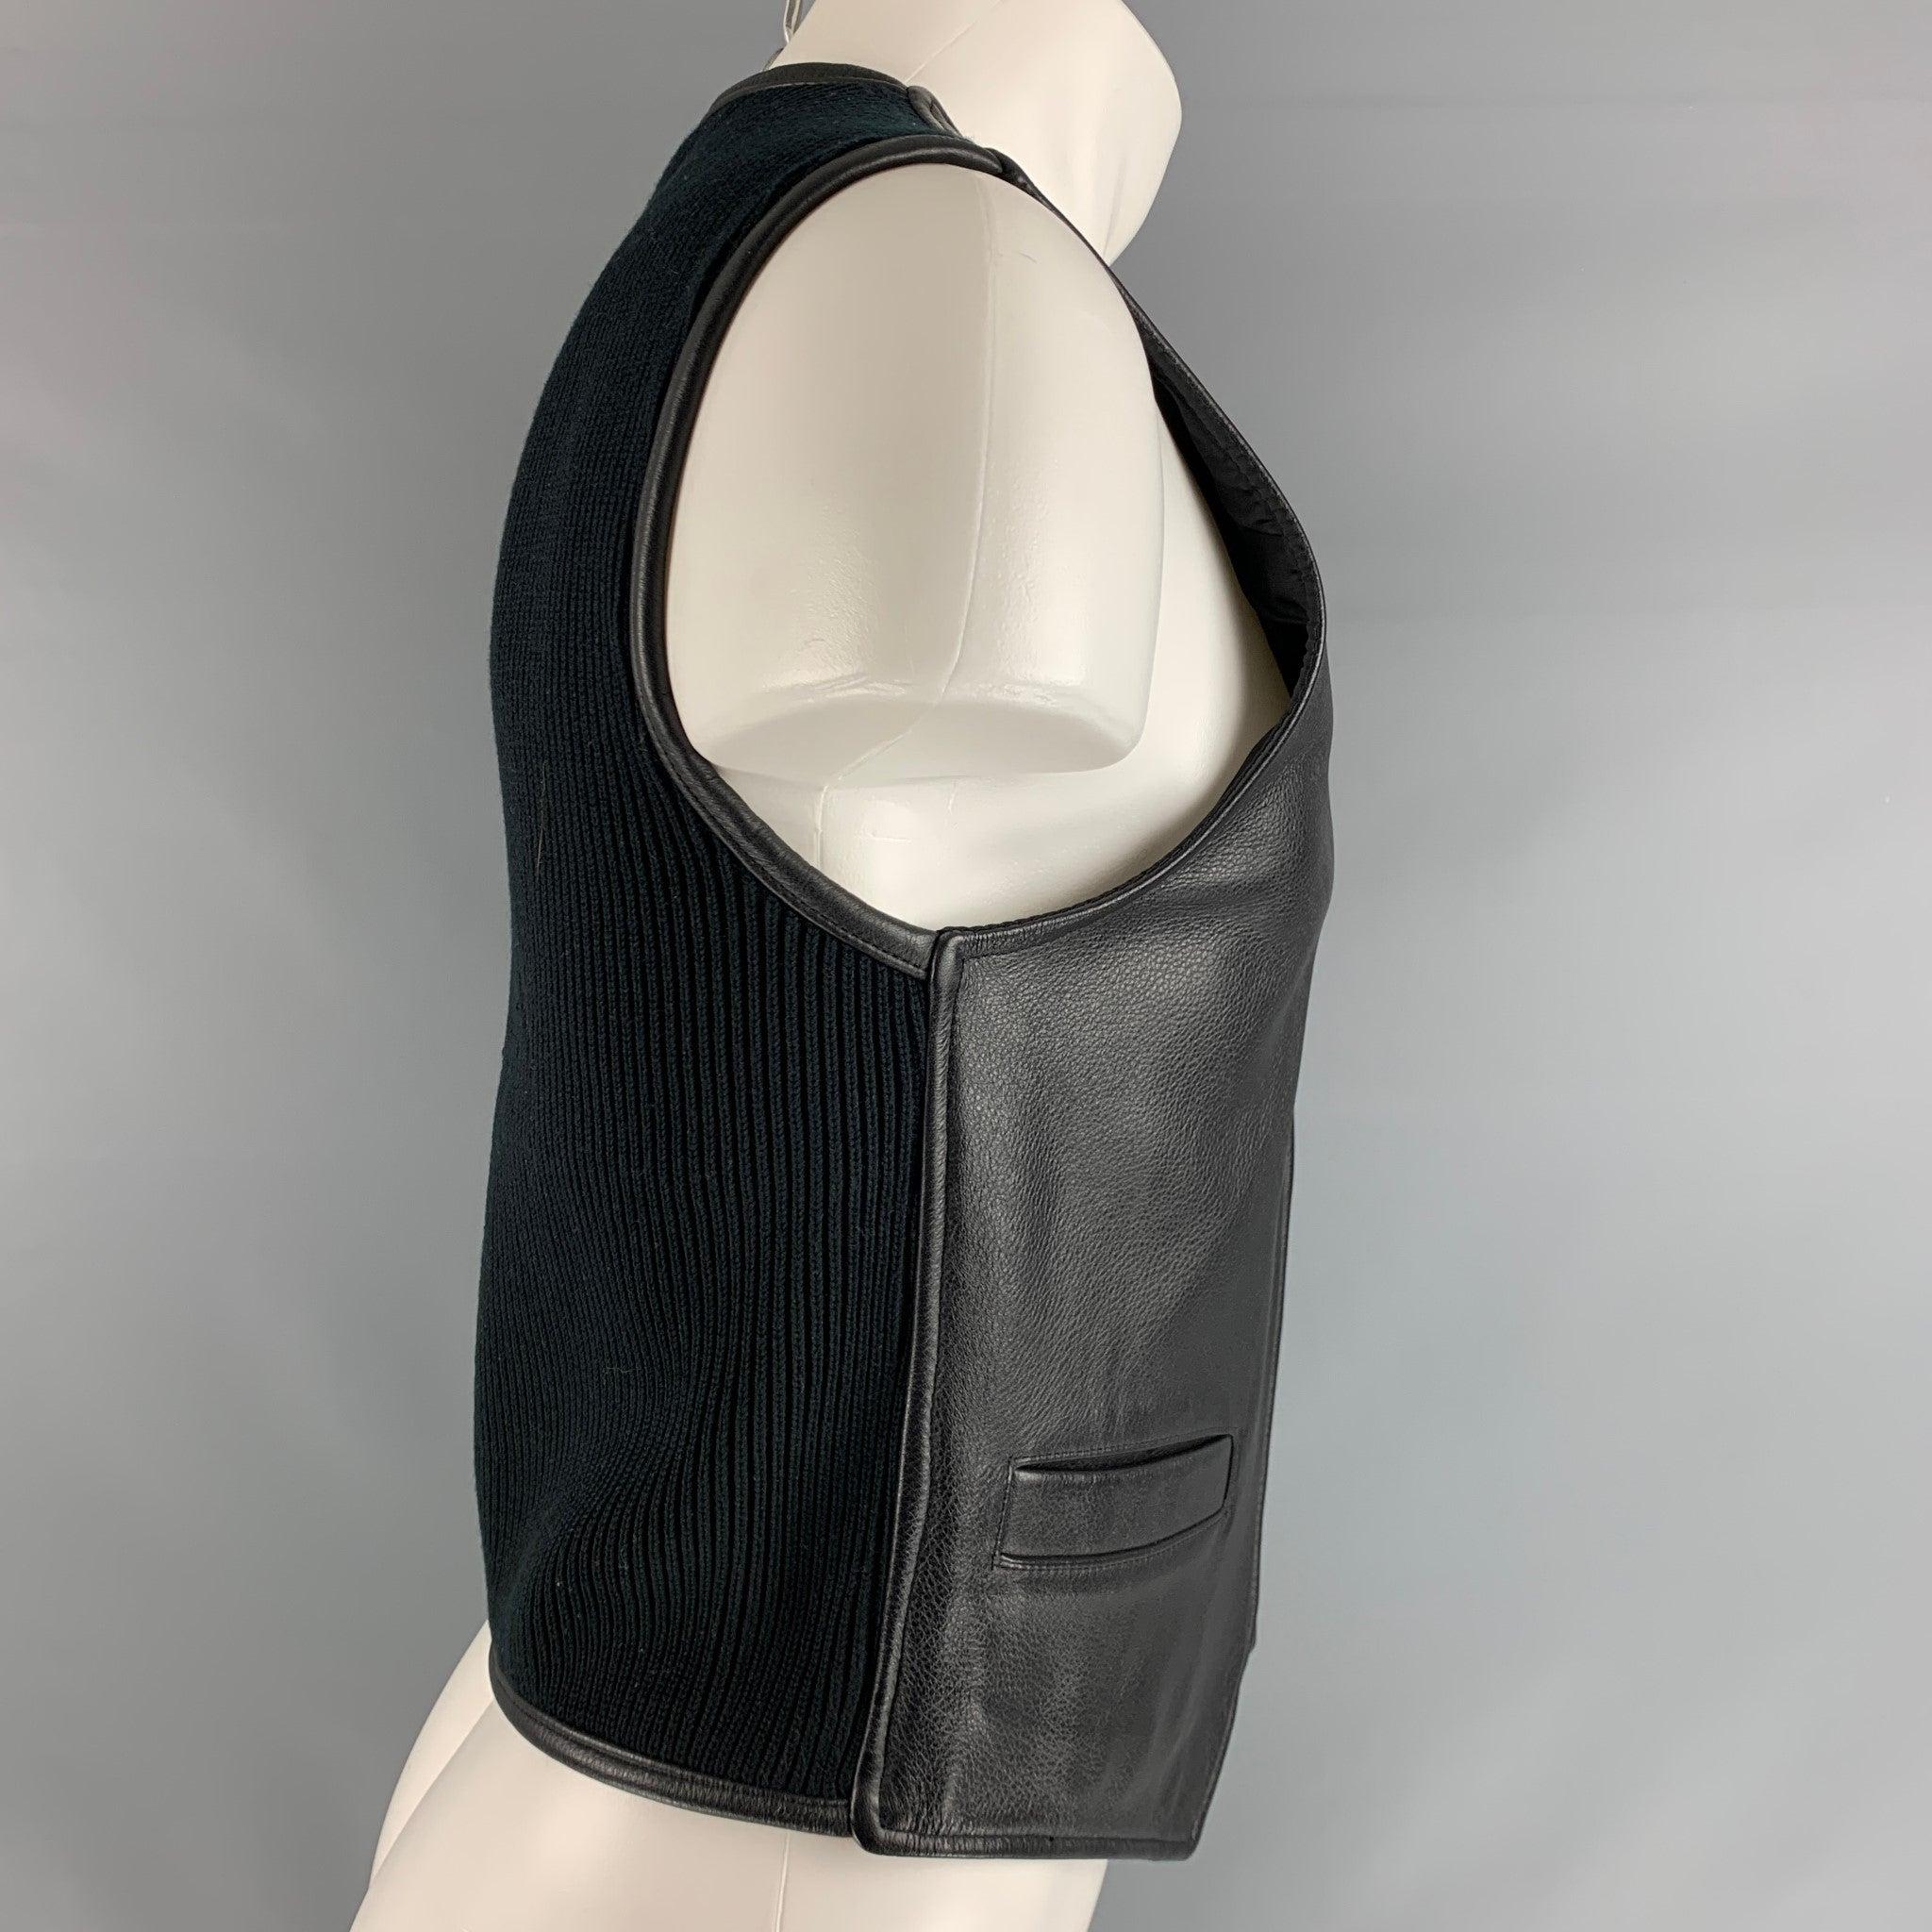 DONNA KARAN DKNY vest comes in a black leather front and knitted back panel featuring two welt pockets, and zip up closure. Excellent Pre-Owned Condition. 

Marked:   S 

Measurements: 
 
Shoulder: 15 inches Chest: 36 inches Length: 22.5 inches  
 